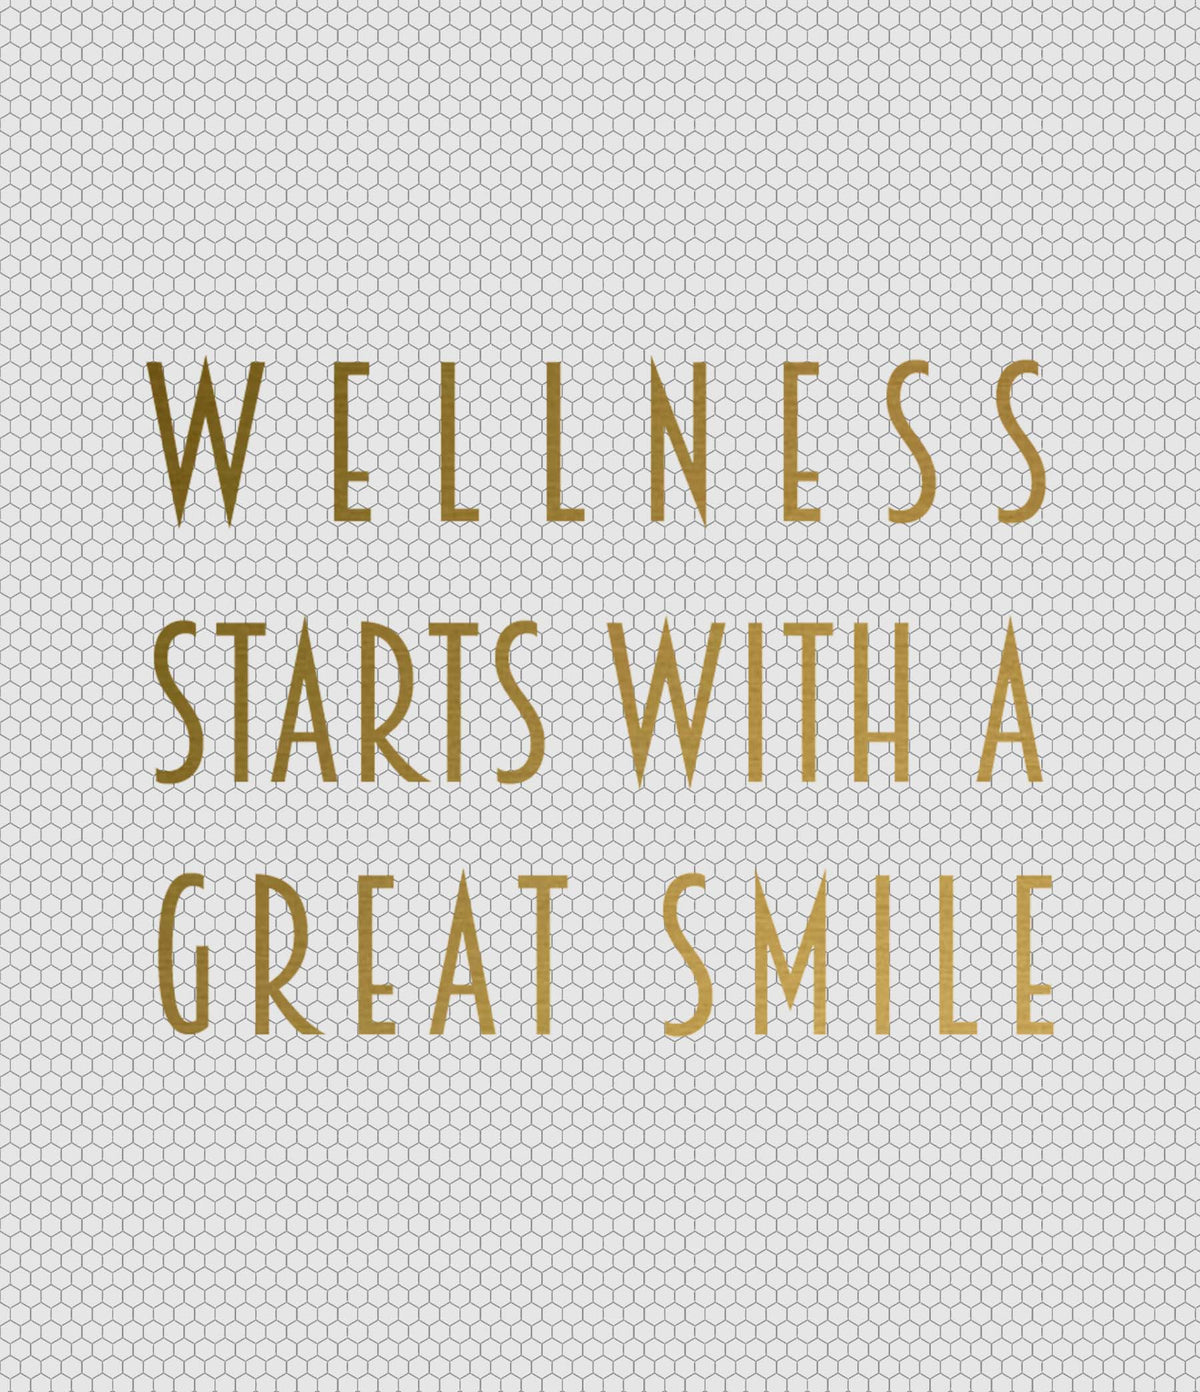 Custom Mosaic with Metallic Letterings (WELLNESS STARTS WITH A GREAT SMILE)